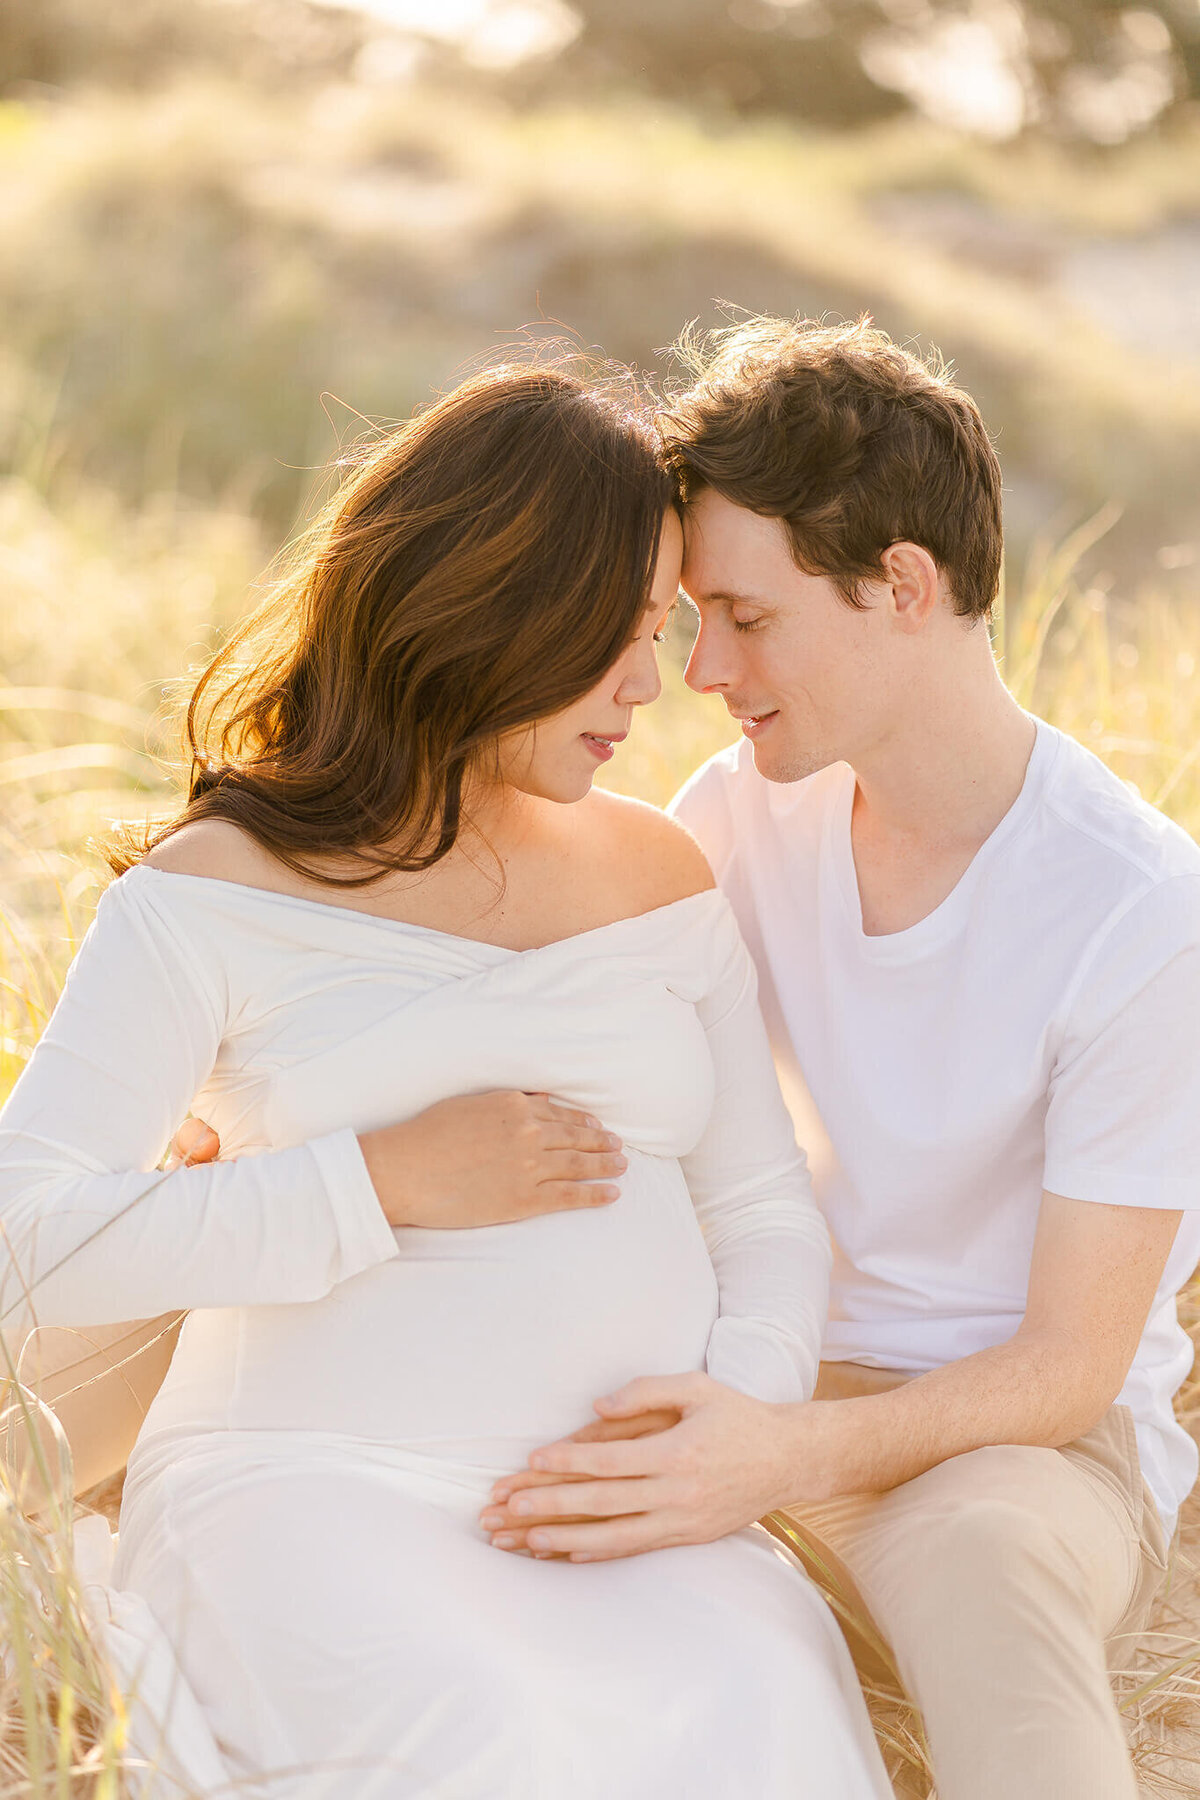 Couples forehead touching for maternity photoshoot during sunset in Gold Coast QLD